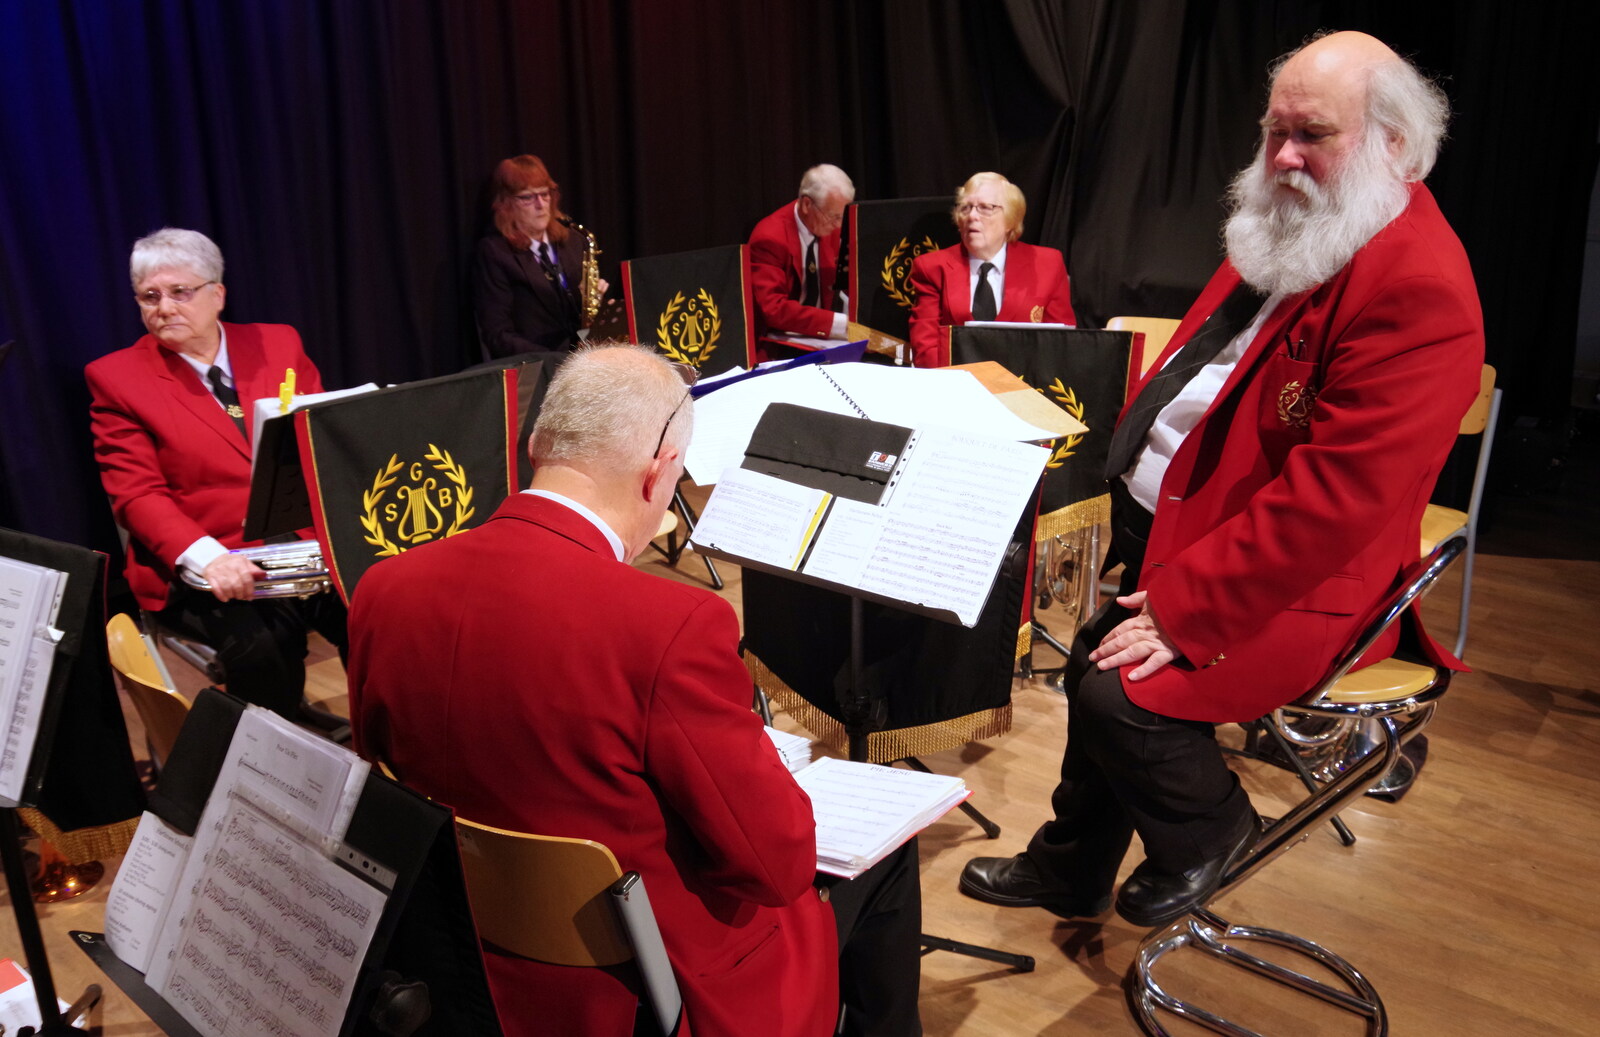 Adrian is installed in his new-ish stool from The GSB at a Twinning Anniversary, Hartismere, Eye, Suffolk - 24th October 2019